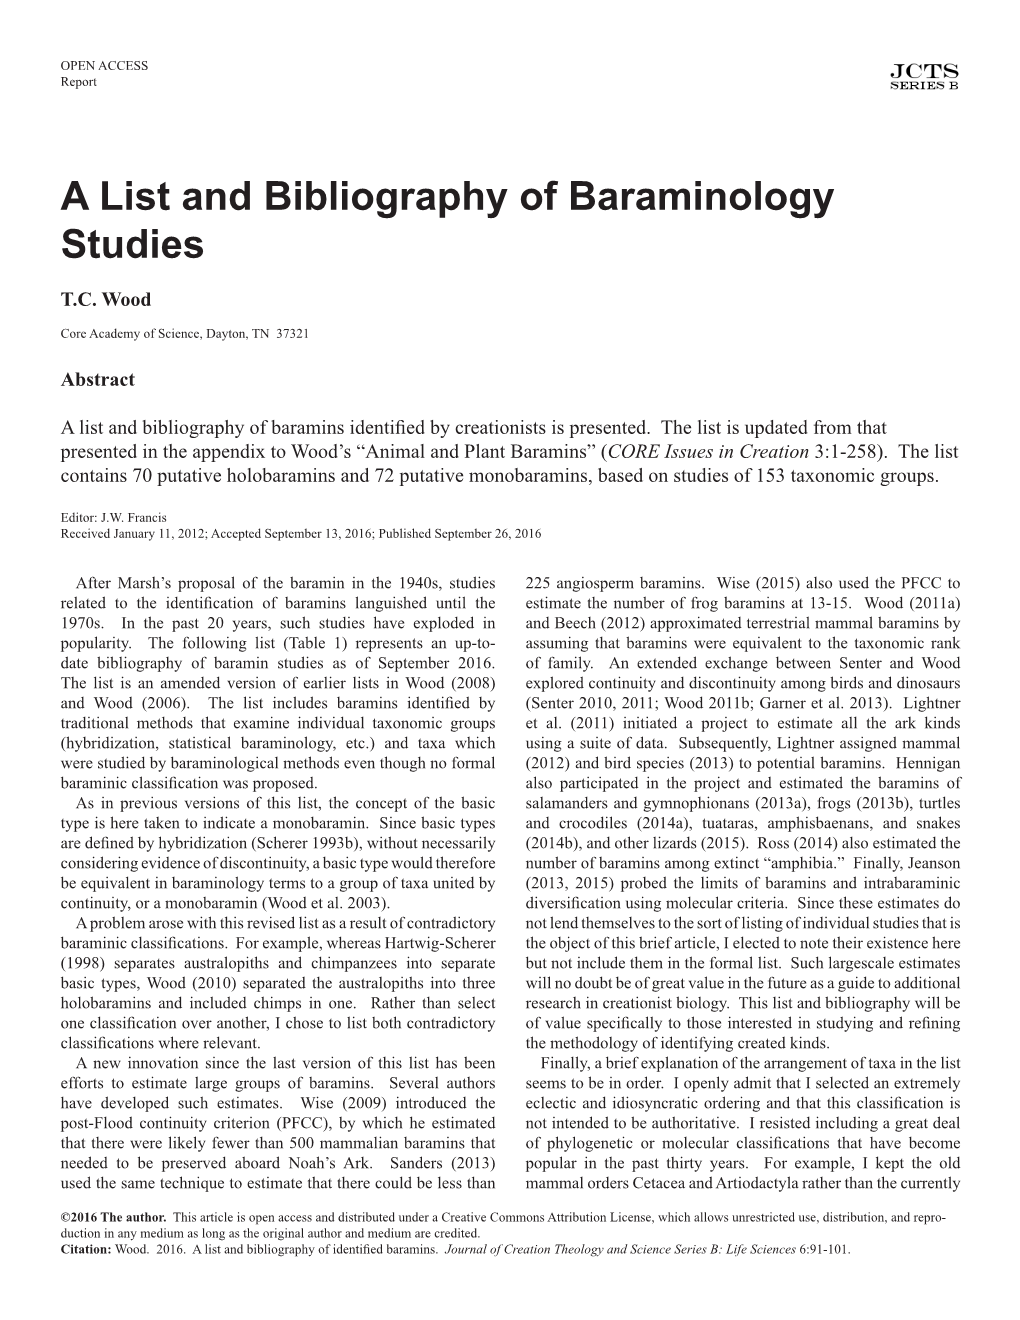 A List and Bibliography of Baraminology Studies T.C